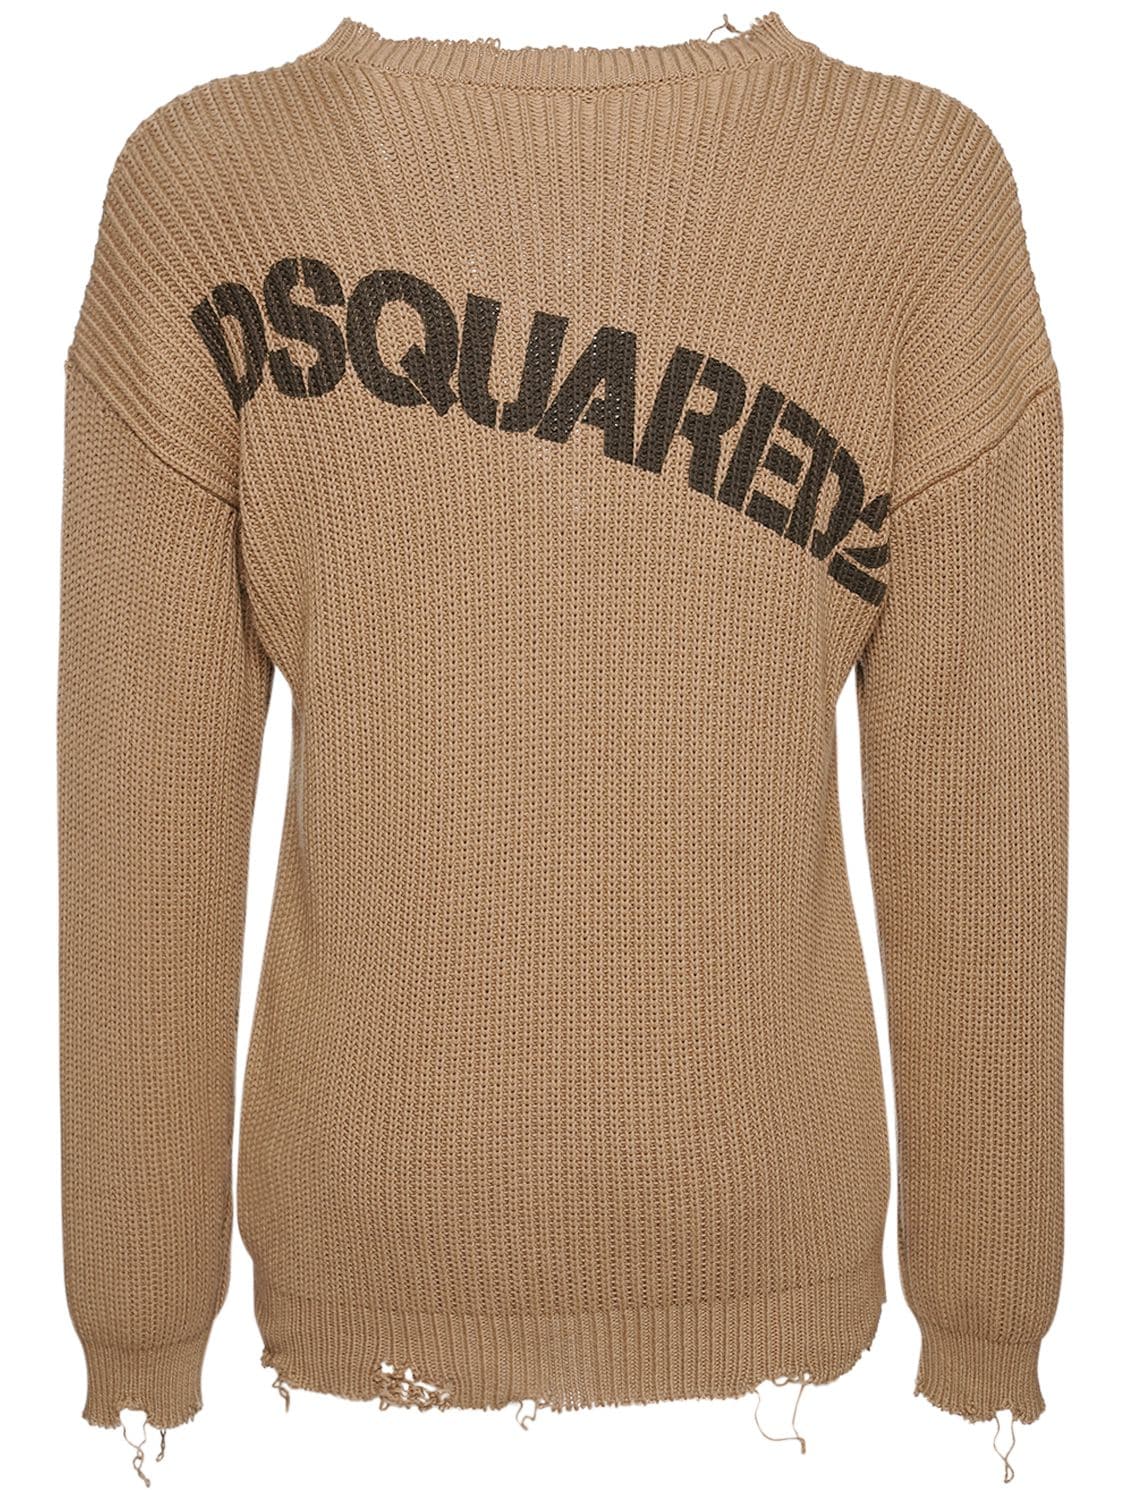 Dsquared2 Destroyed Logo Print Knit Cotton Sweater In Beige